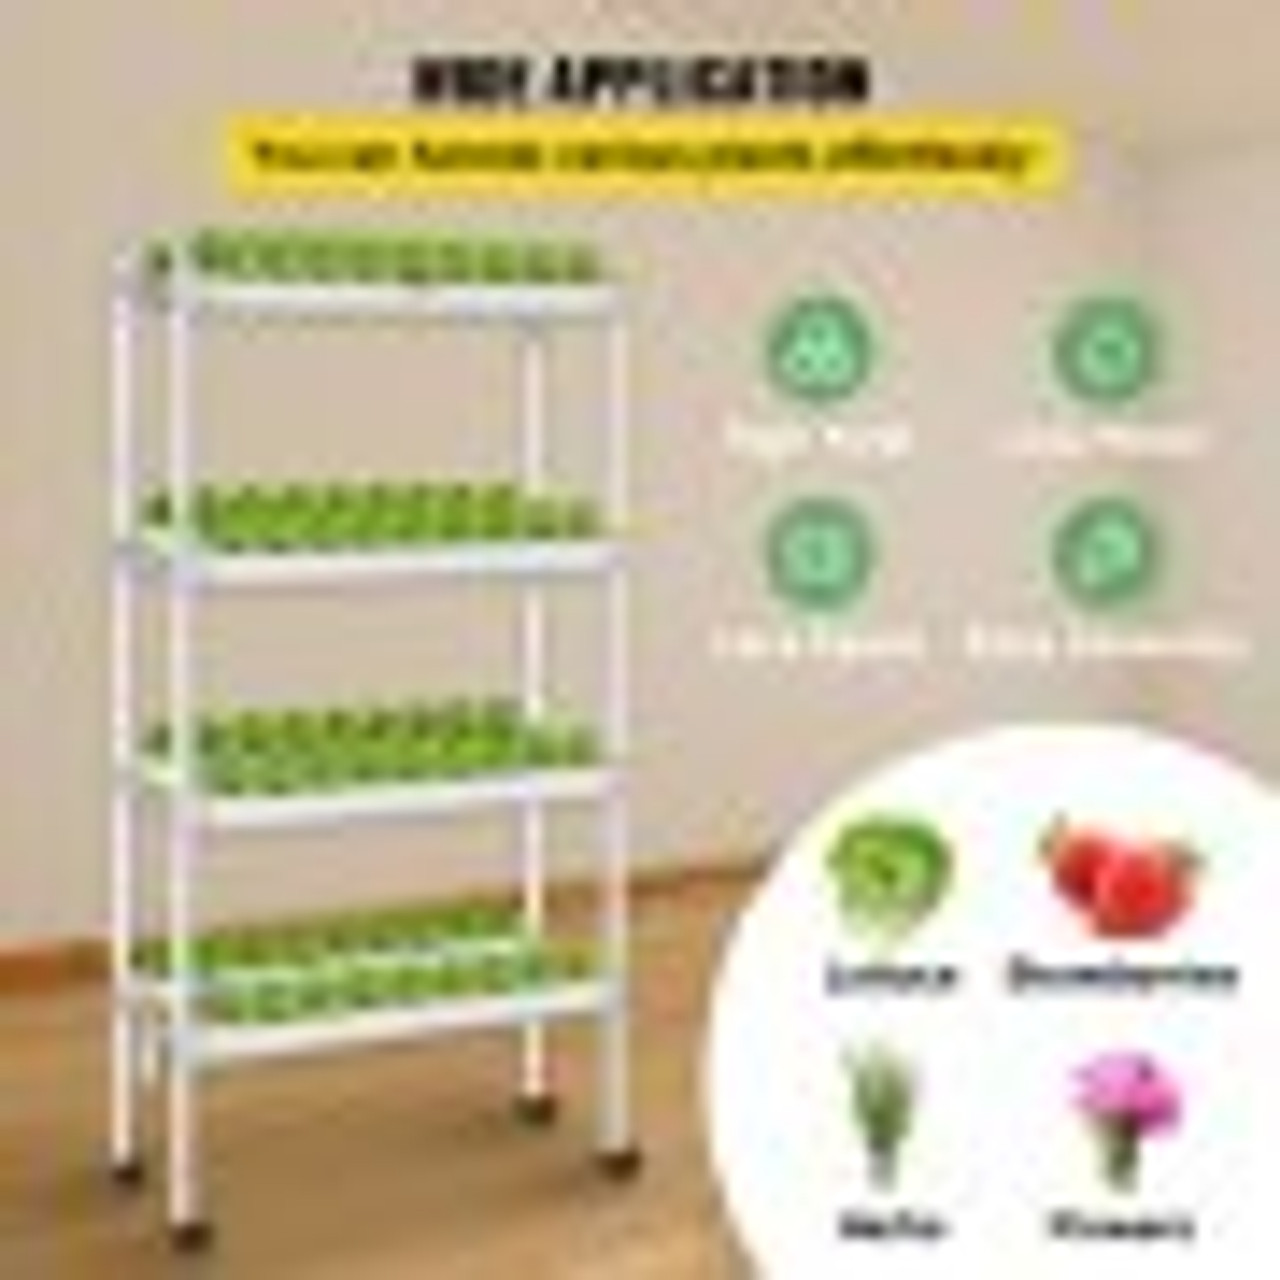 Hydroponics Growing System, 72 Sites 8 Food-Grade PVC-U Pipes, 4 Layers Indoor Planting Kit with Water Pump, Timer, Nest Basket, Sponge, for Fruits, Vegetables, Herbs, White